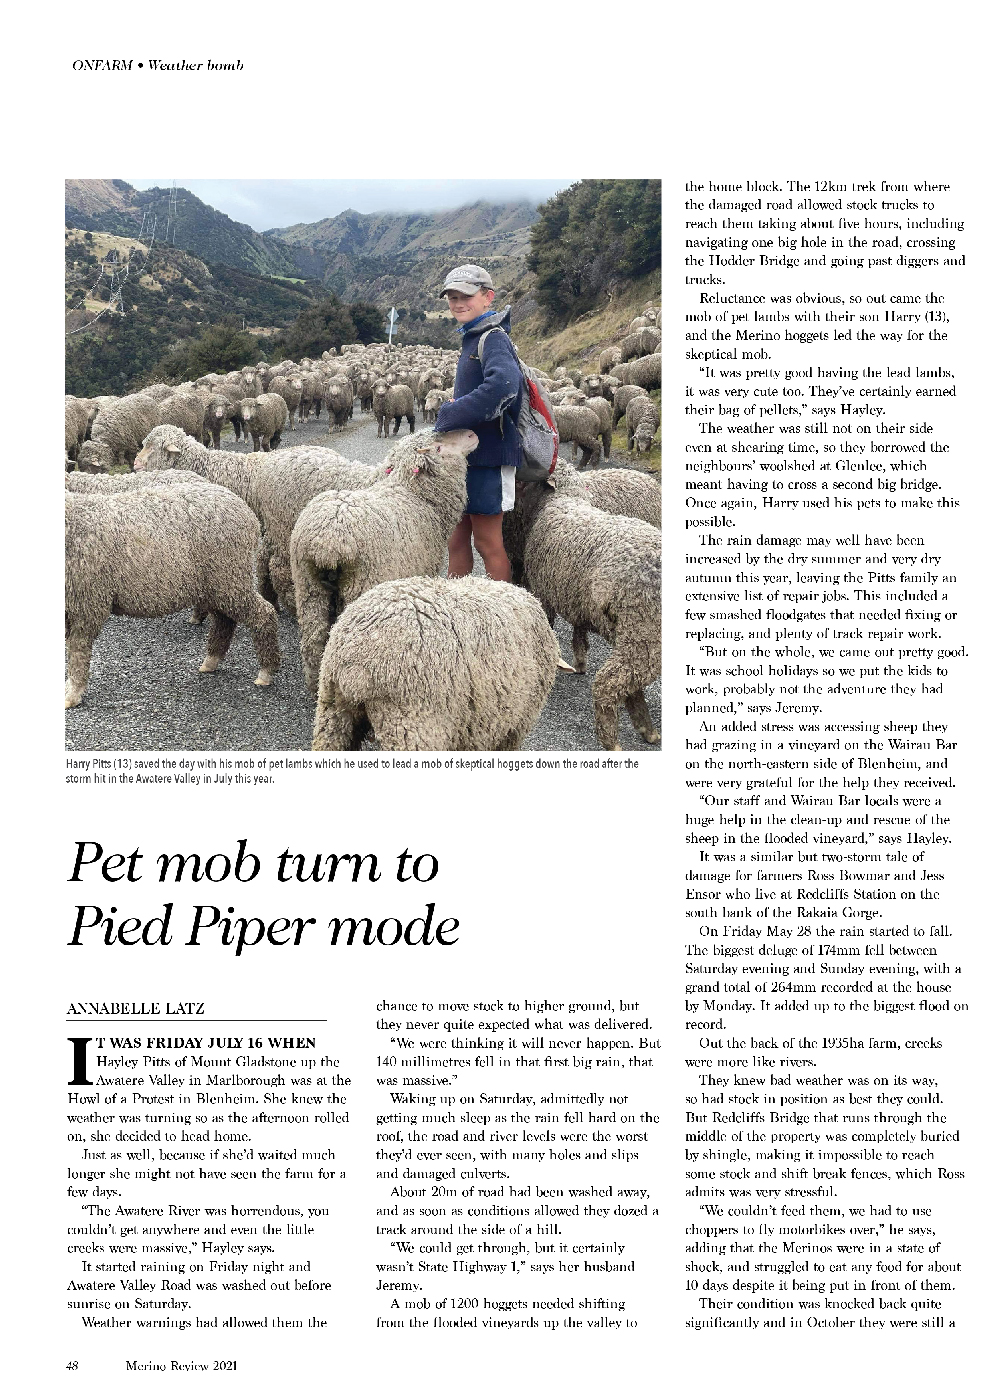 Pet mob turn to Pied Piper | With Belles On mode